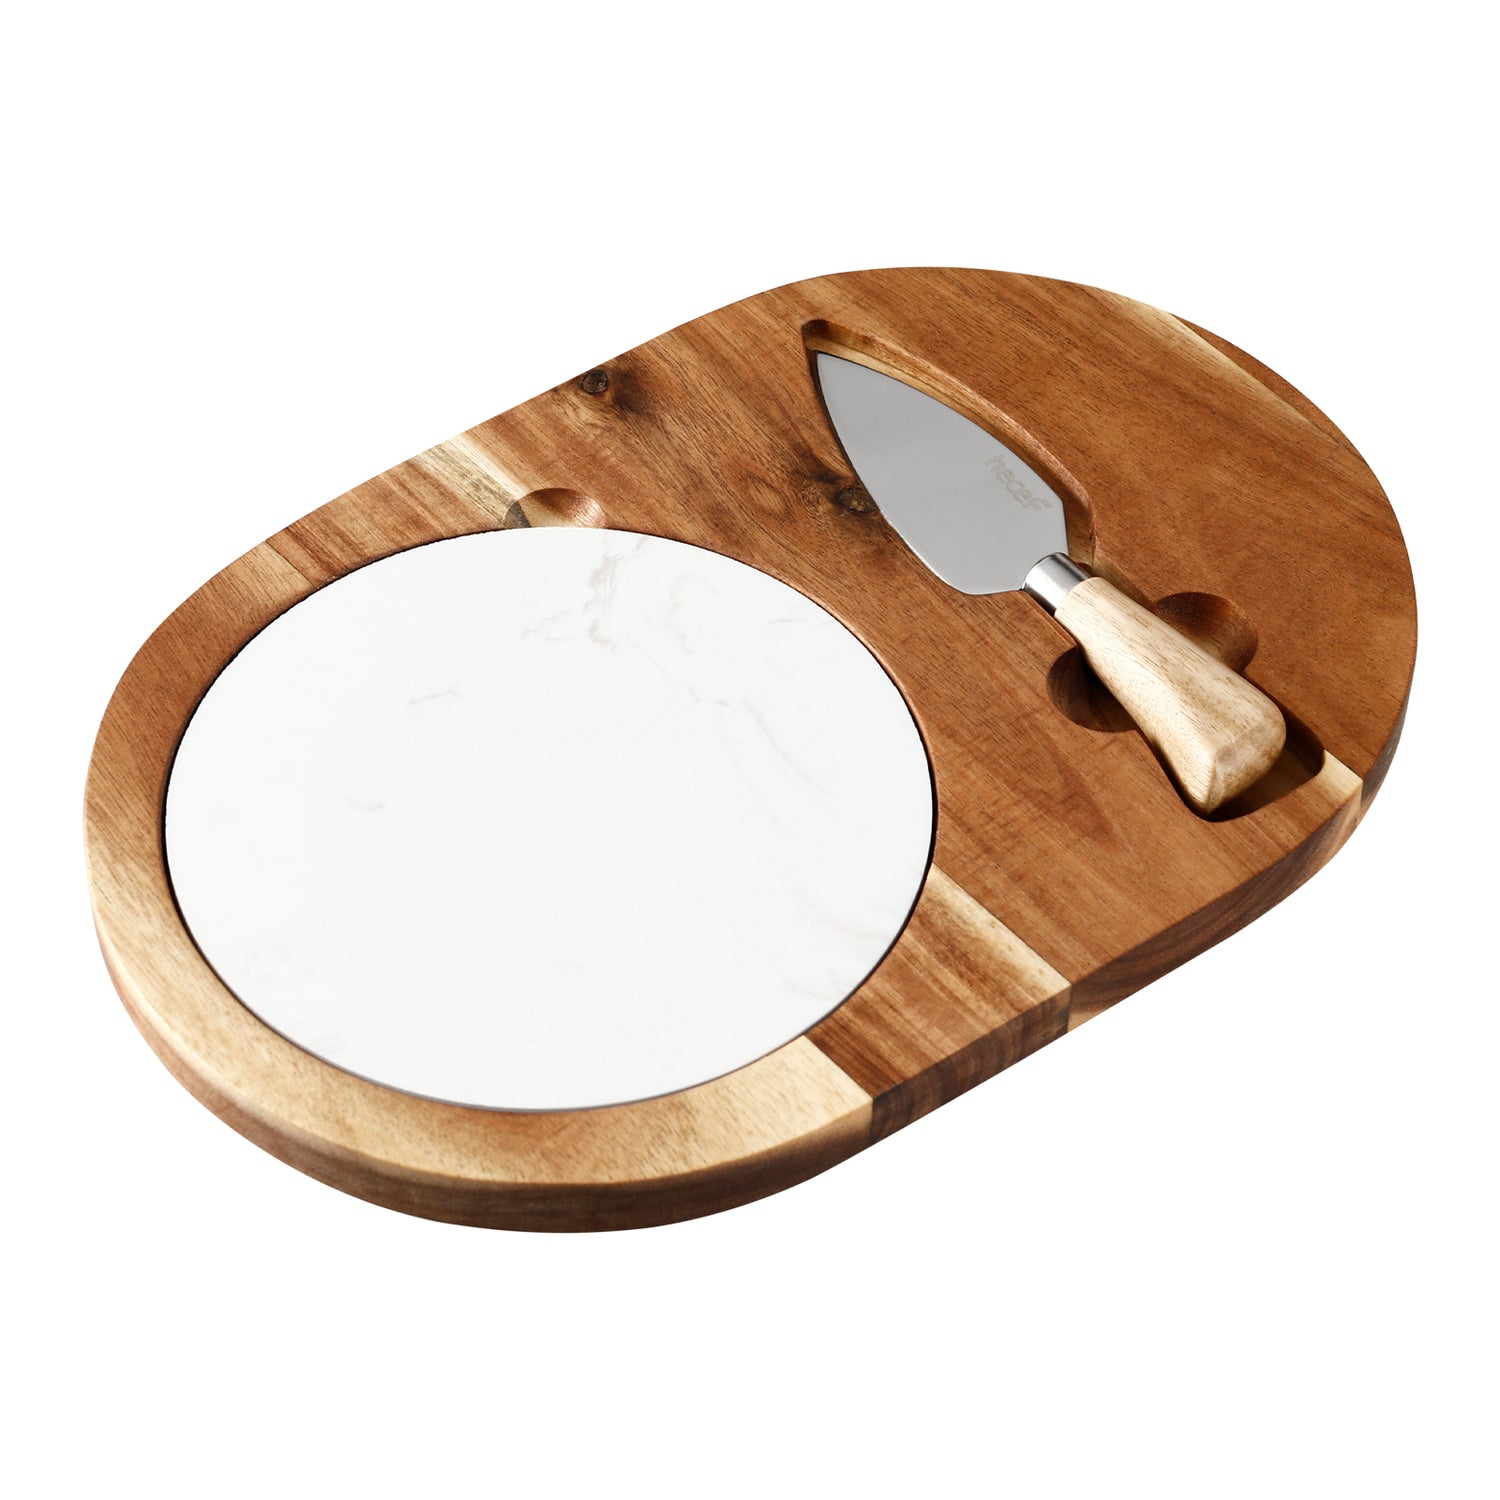 Hecef Oval Acacia Wood Cheese Board Gift Set with White Marble & Knife - Hecef Kitchen